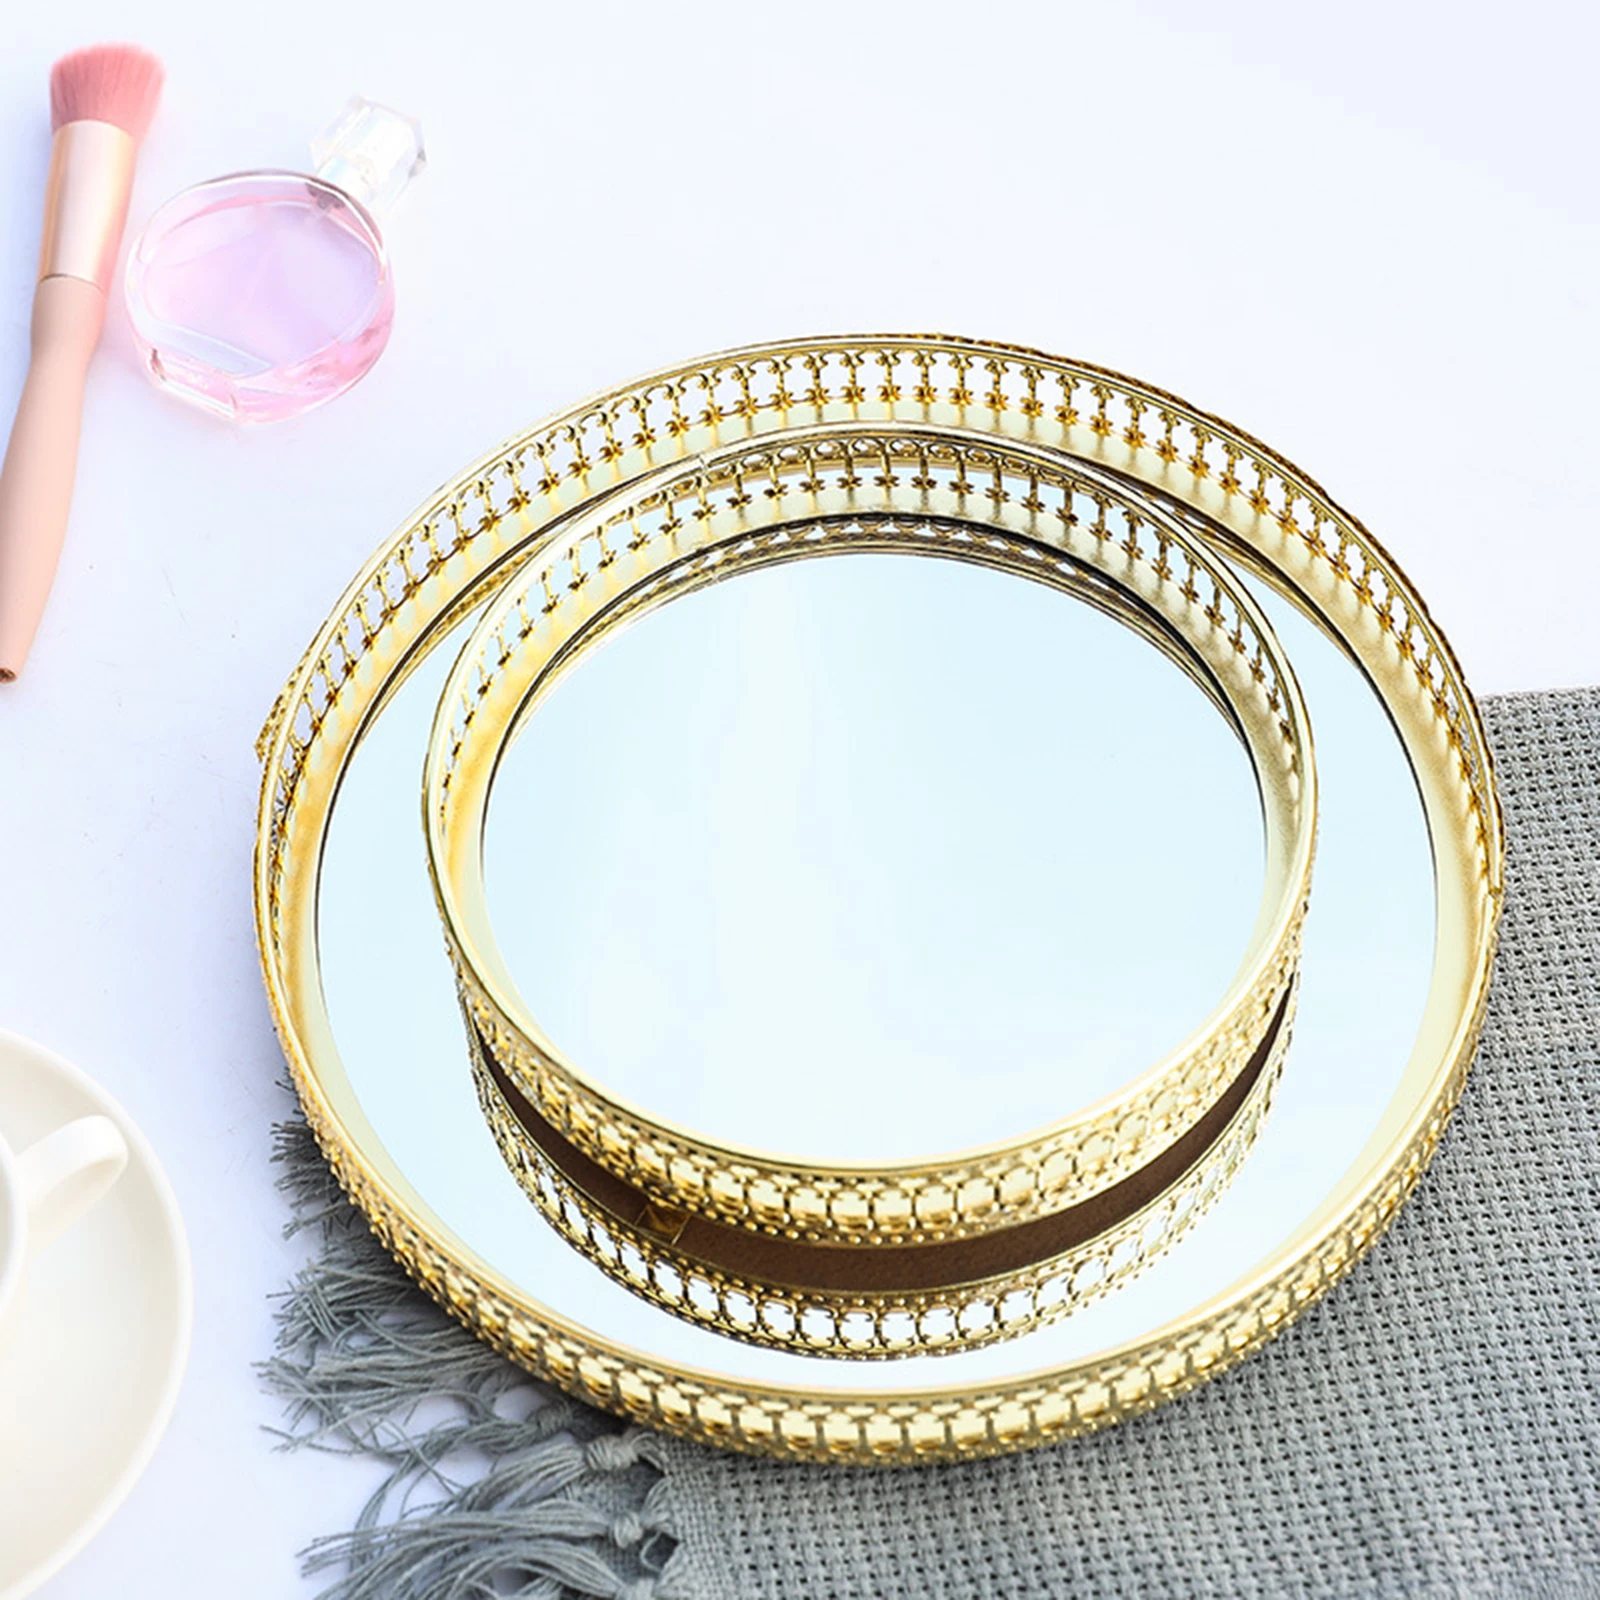 Vintage Mirror Glass Metal Storage Tray Gold Round Fruit Plate Desktop Small Items Jewelry Display Tray Plate